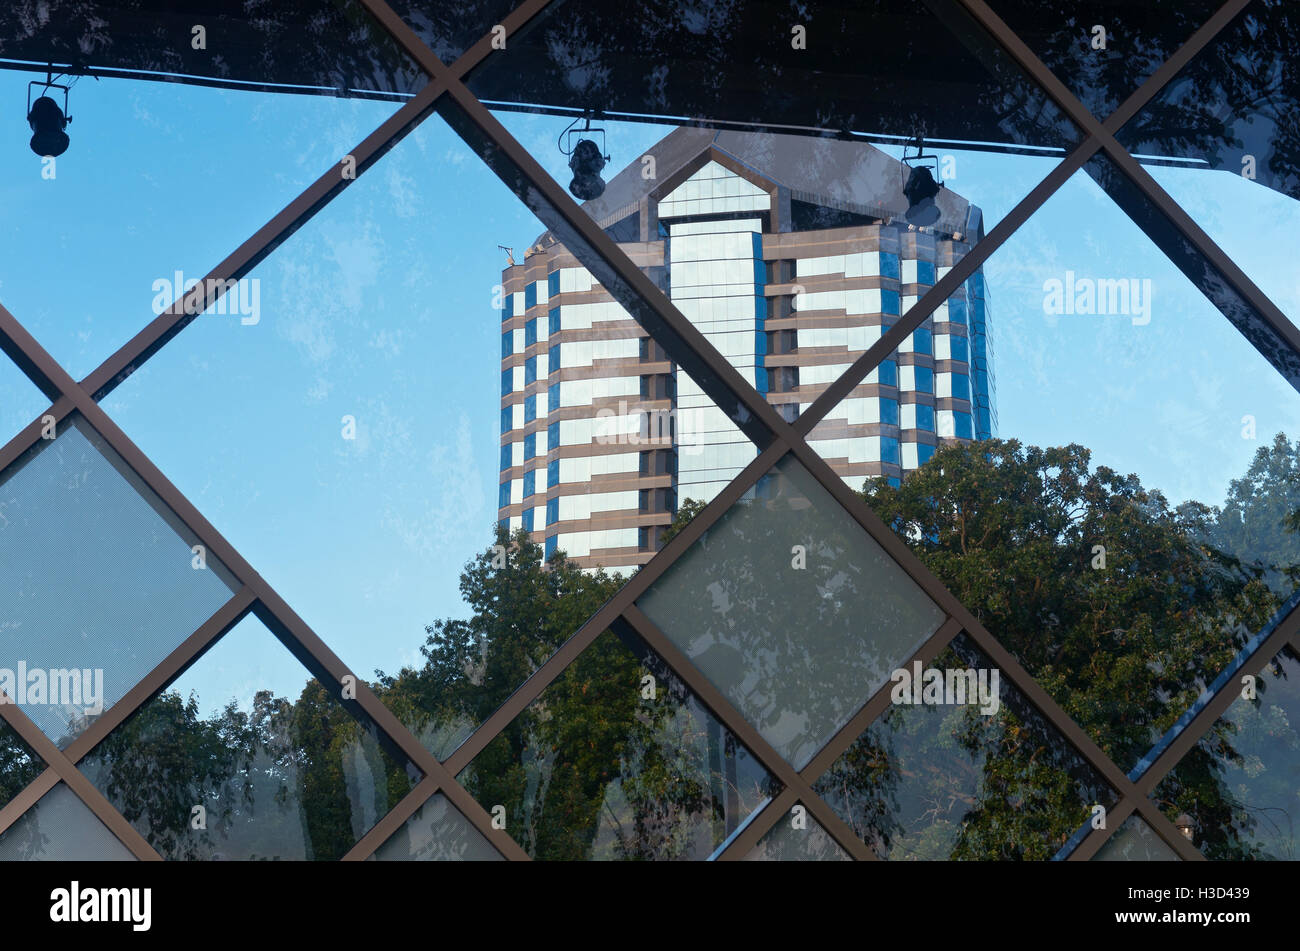 corporate office high rise framed by glass wall and trees in bloomington minnesota Stock Photo